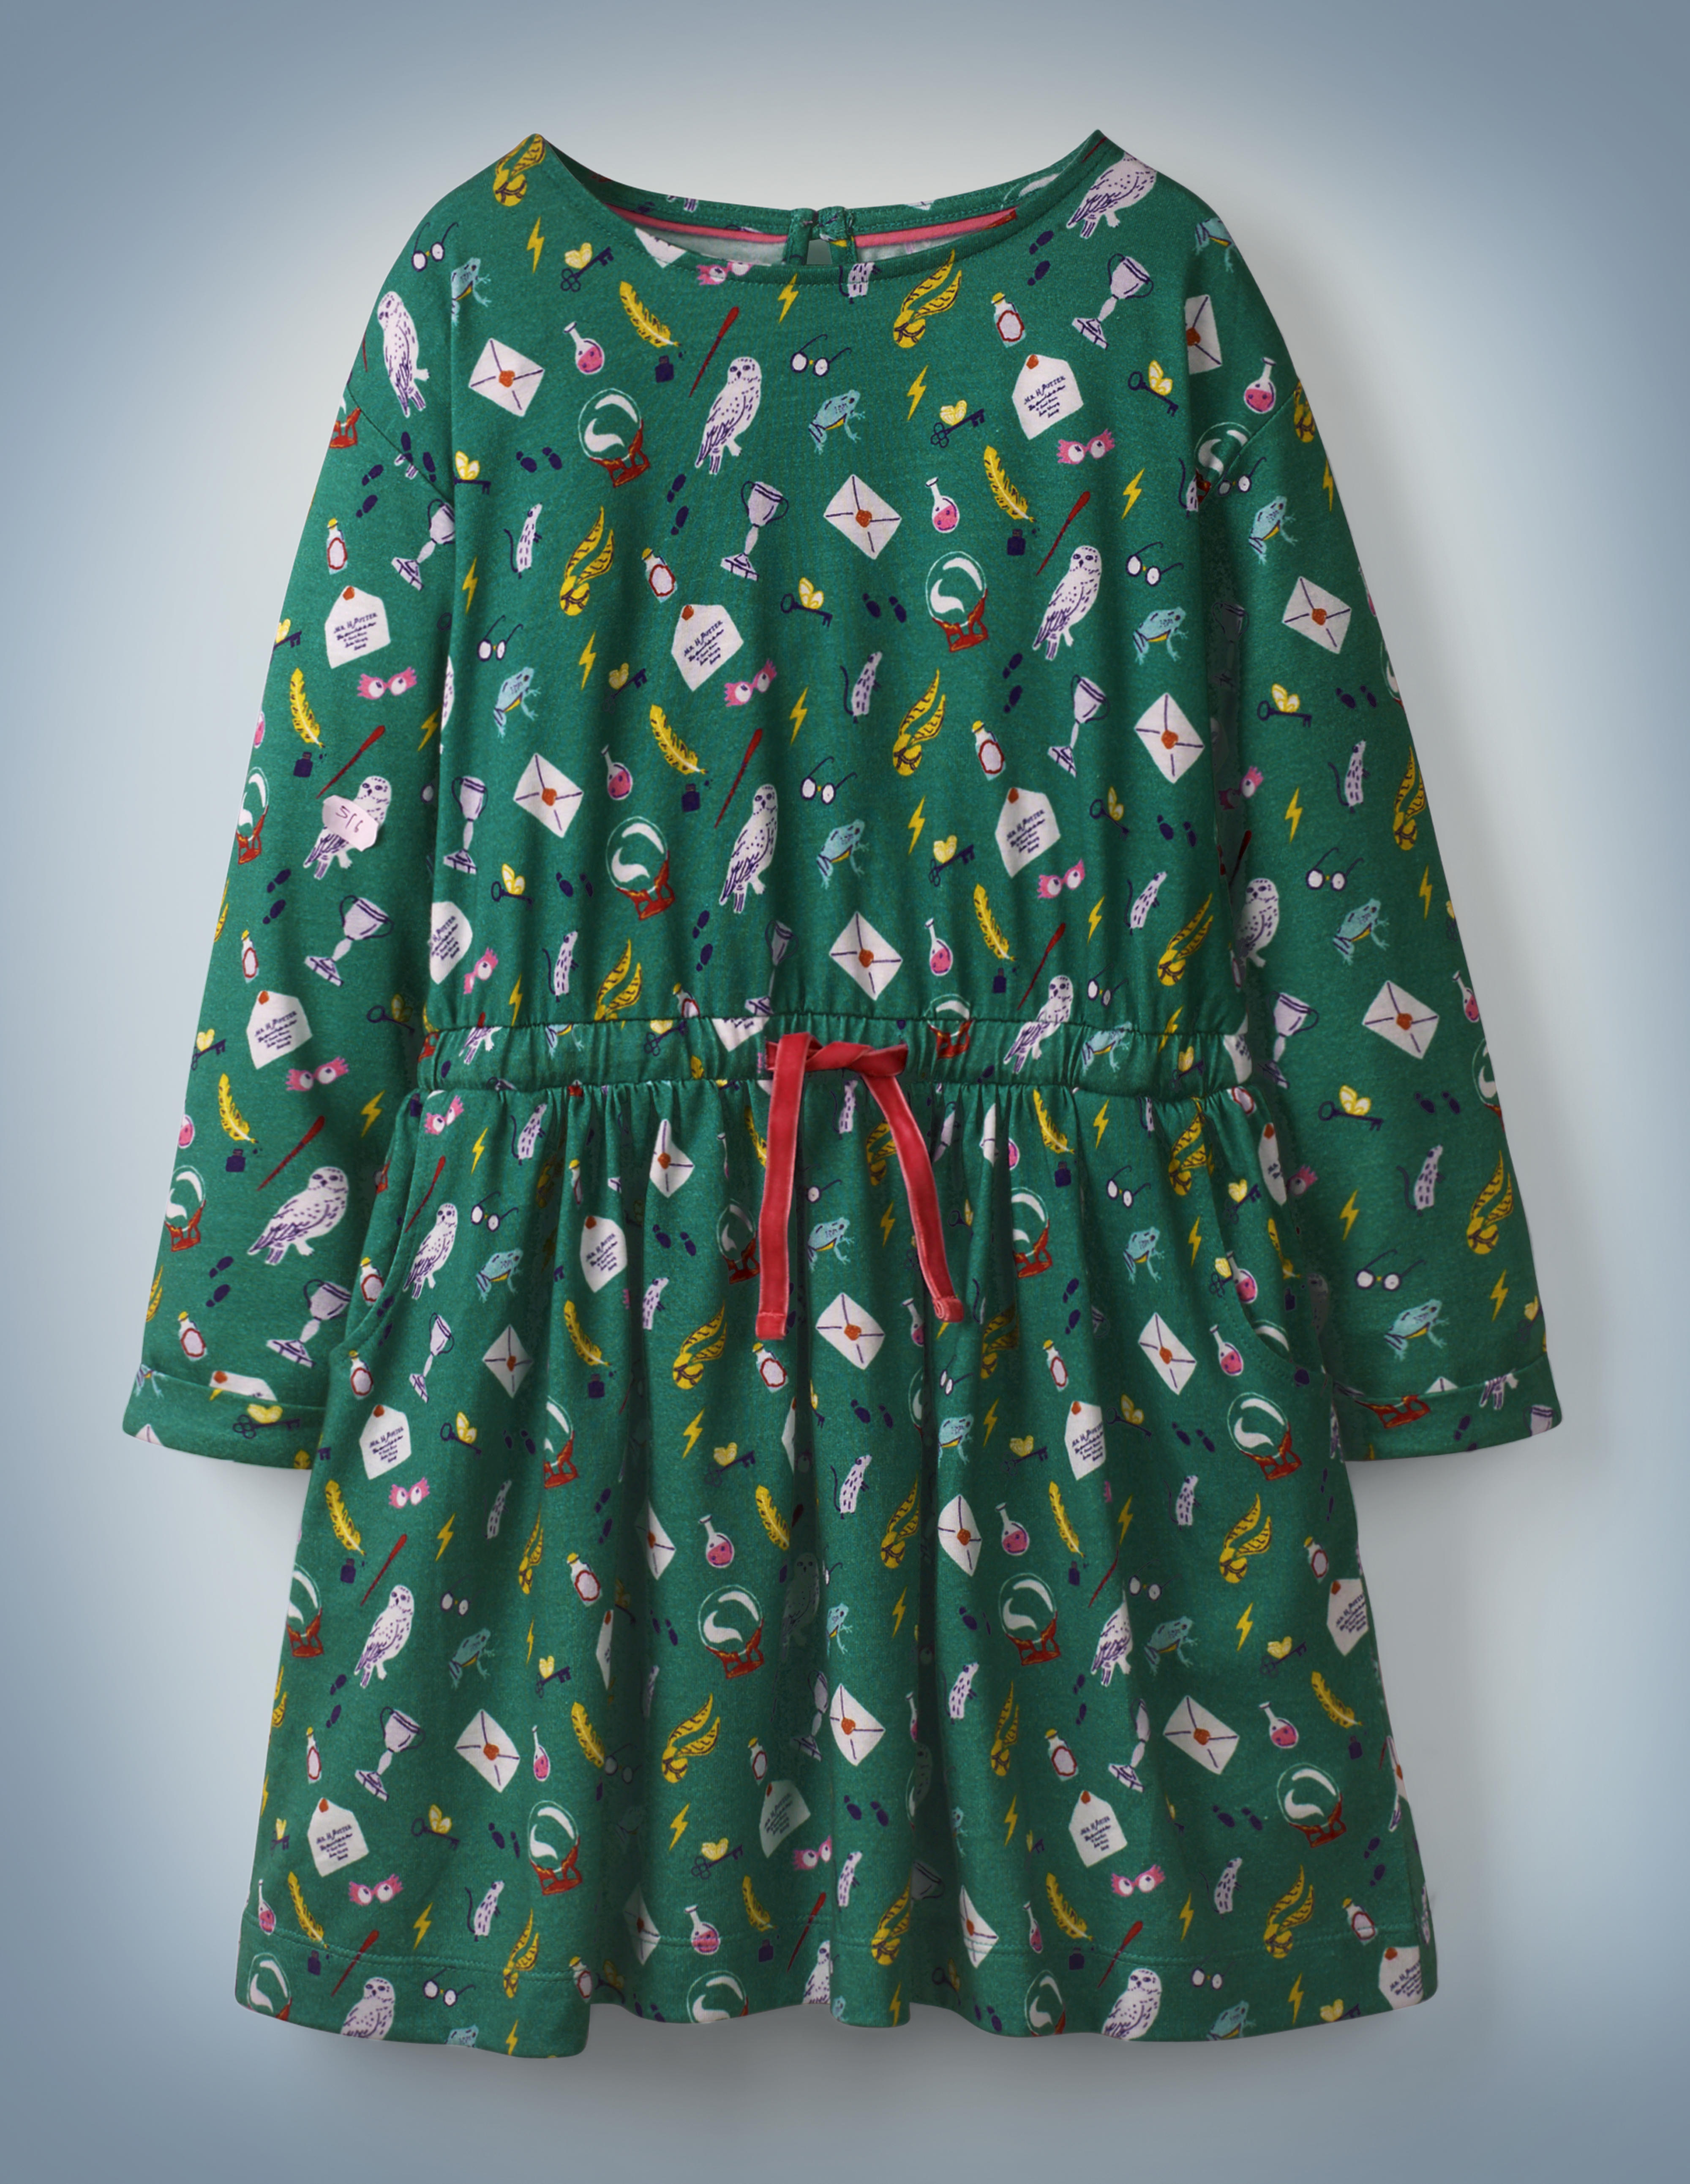 The Mini Boden Hogwarts Printed Dress in green features an all-over pattern of iconic “Harry Potter” images, including Luna Lovegood’s Spectrespecs, Hedwig, and a Hogwarts acceptance letter. The dress features a red drawstring in its center. It retails at £24.